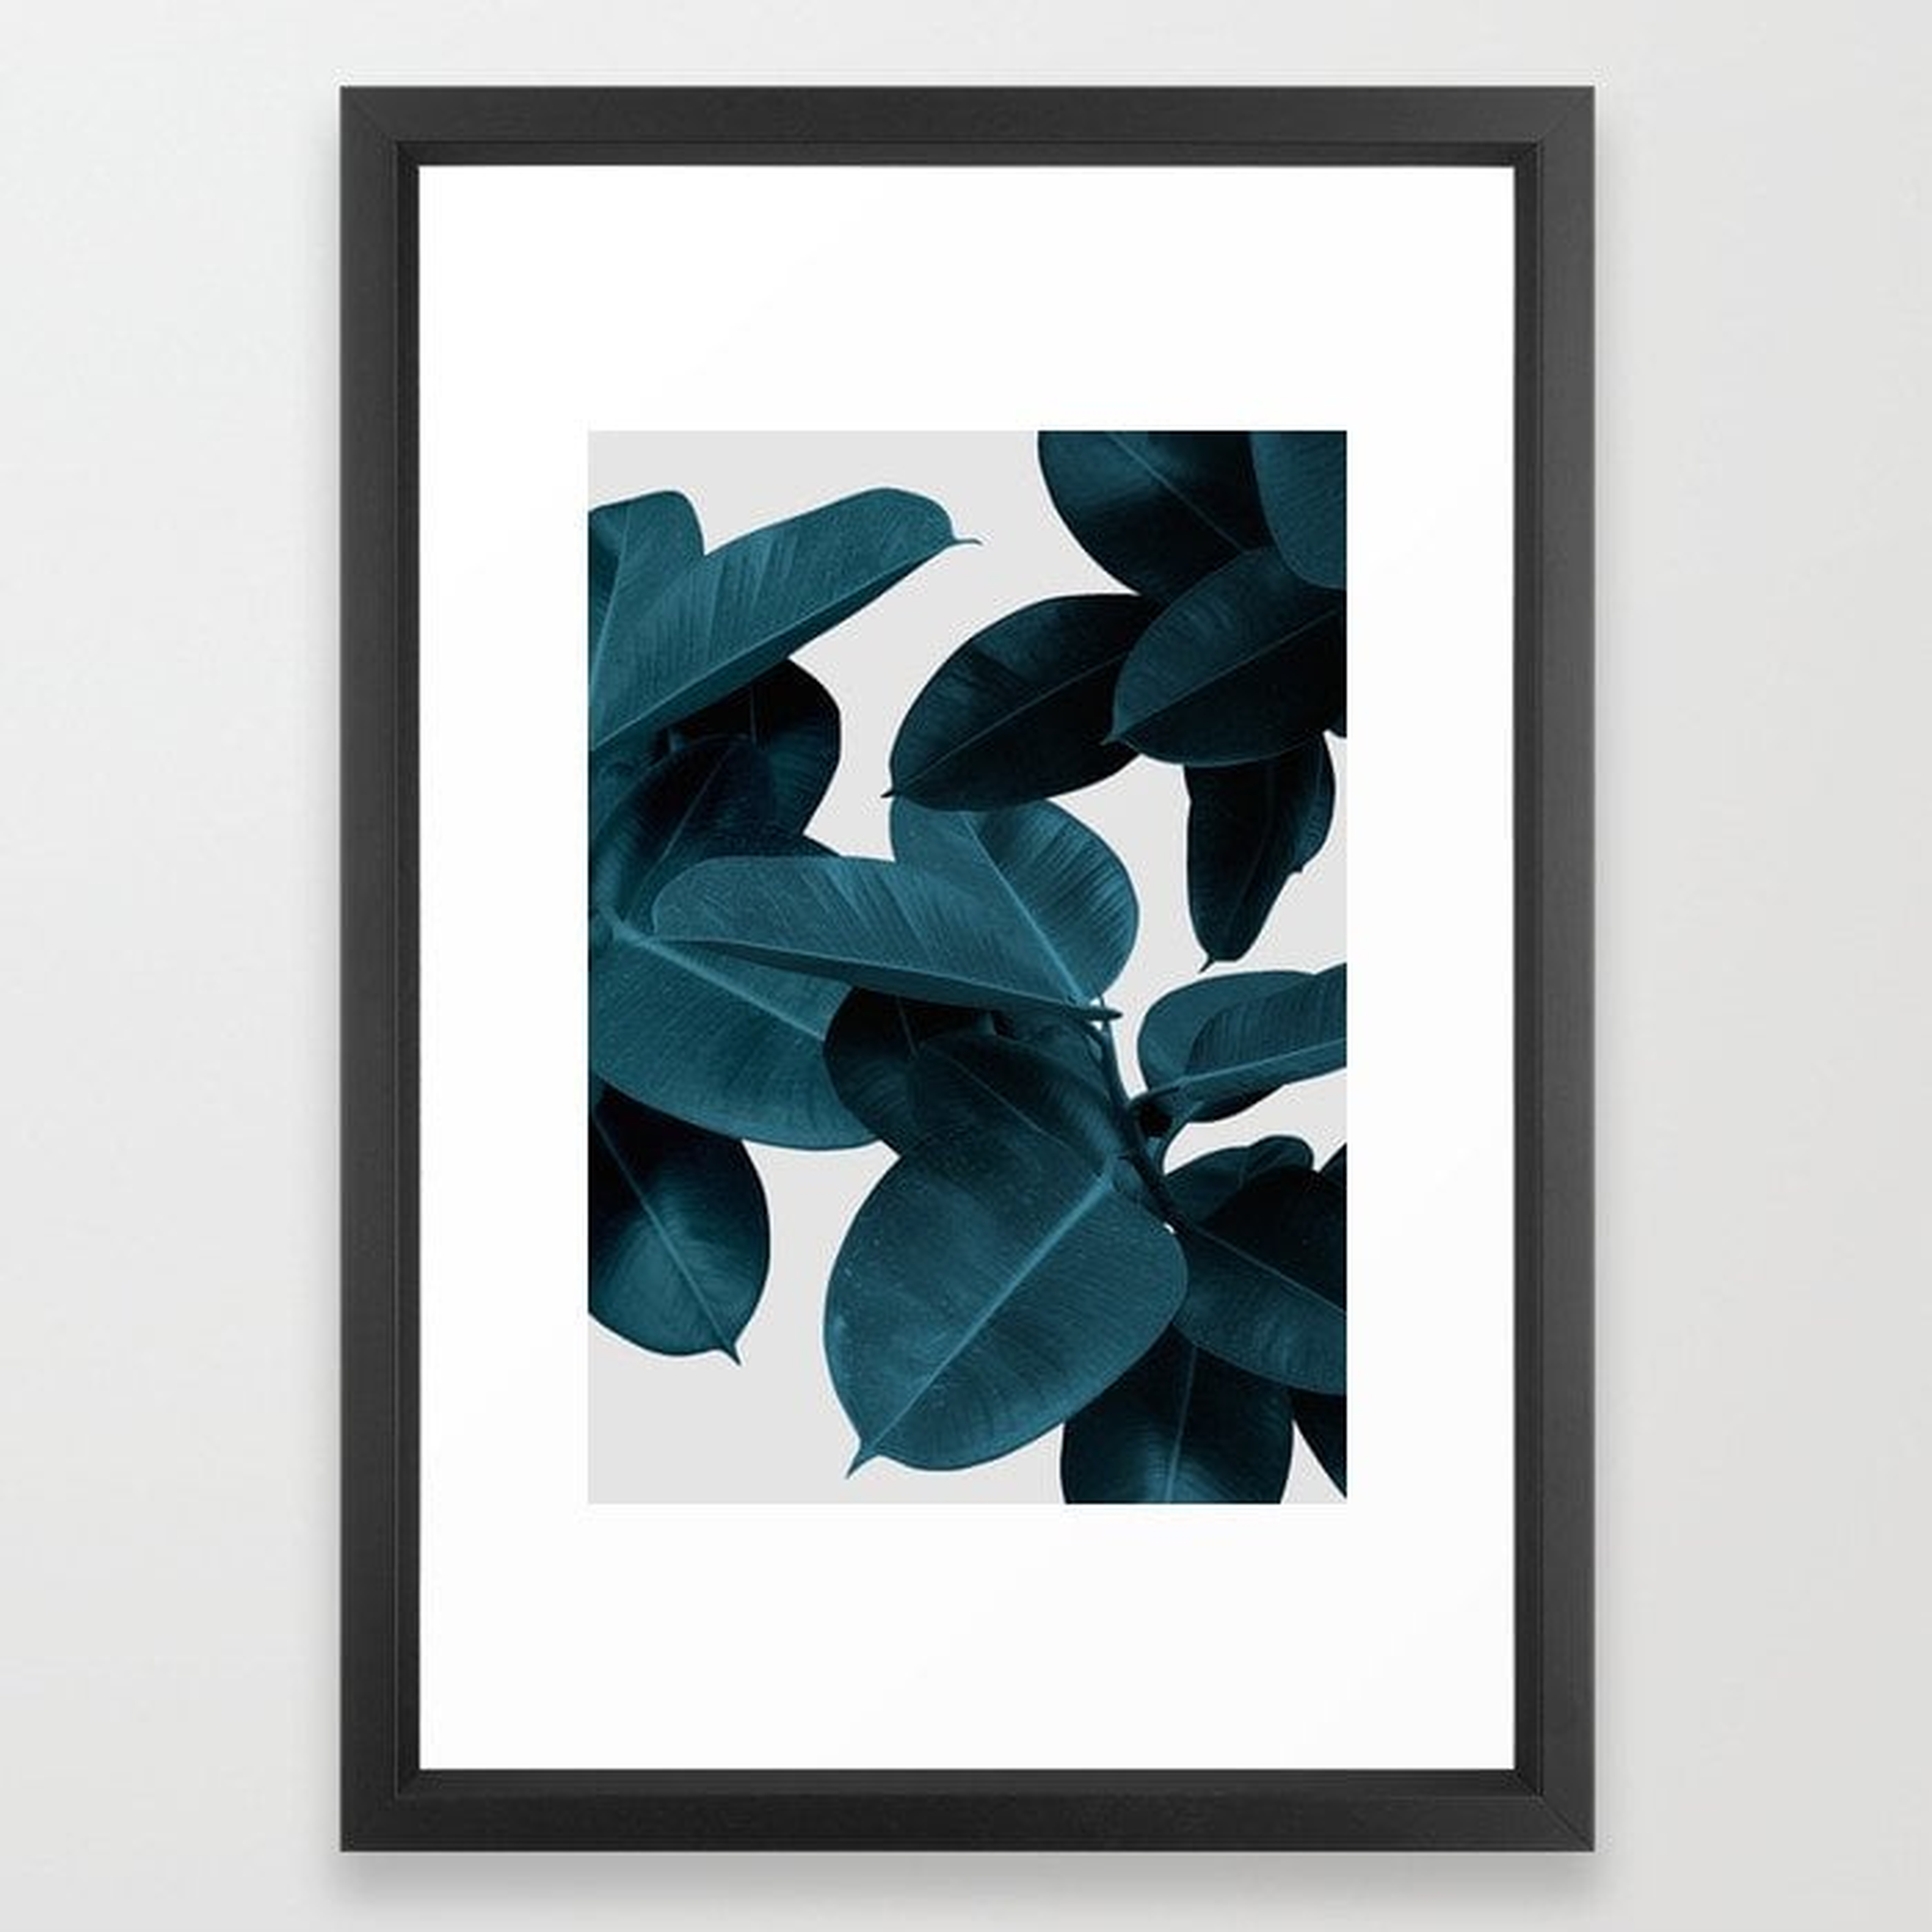 Indigo Blue Plant Leaves Framed Art Print by PrintsProject - Society6